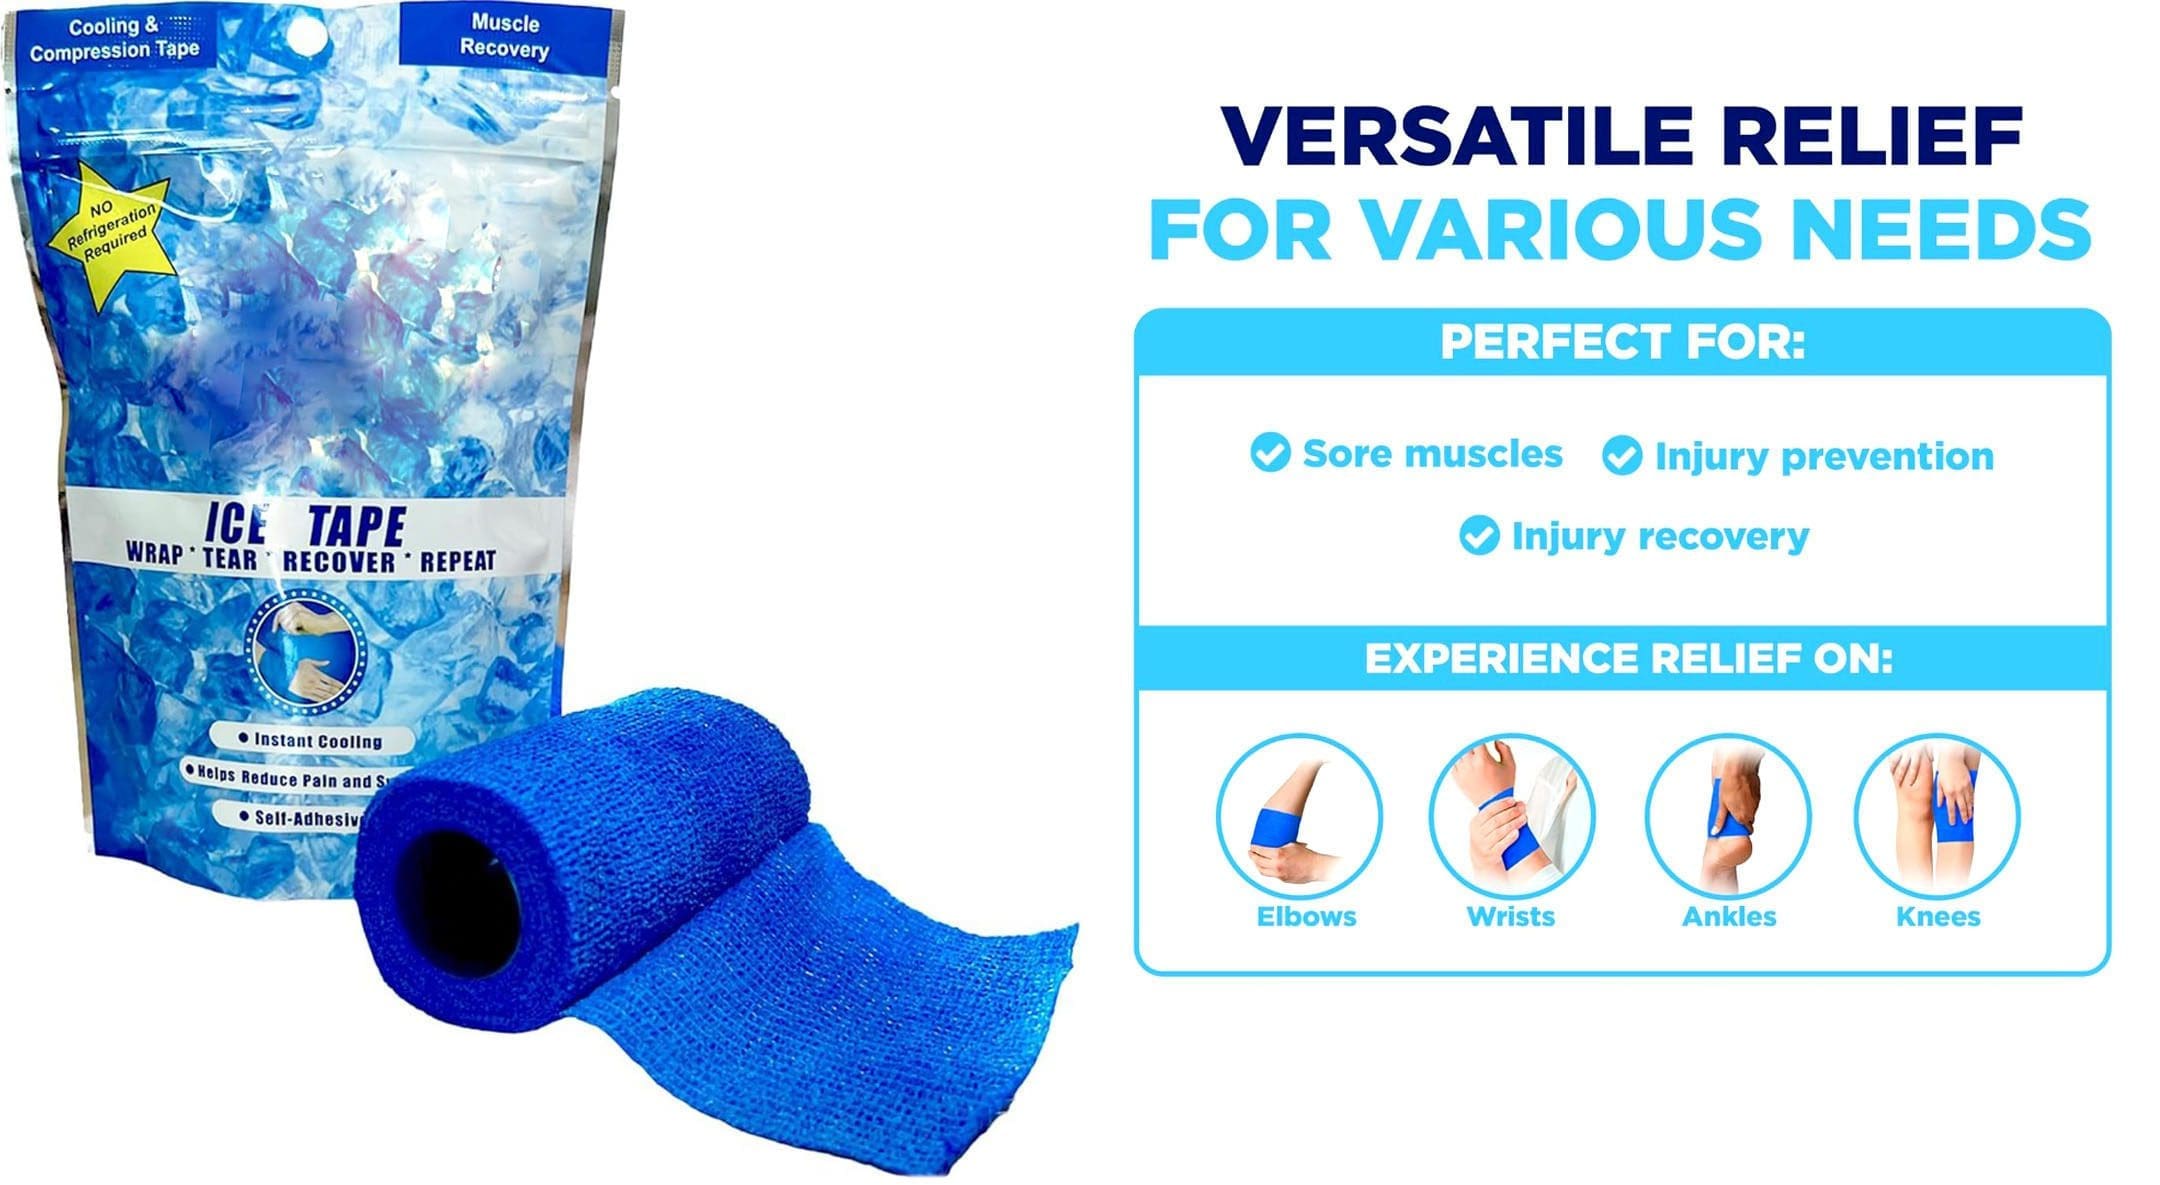 Learn How Ice Tape Can Reduce Musculoskeletal Injury Swelling 